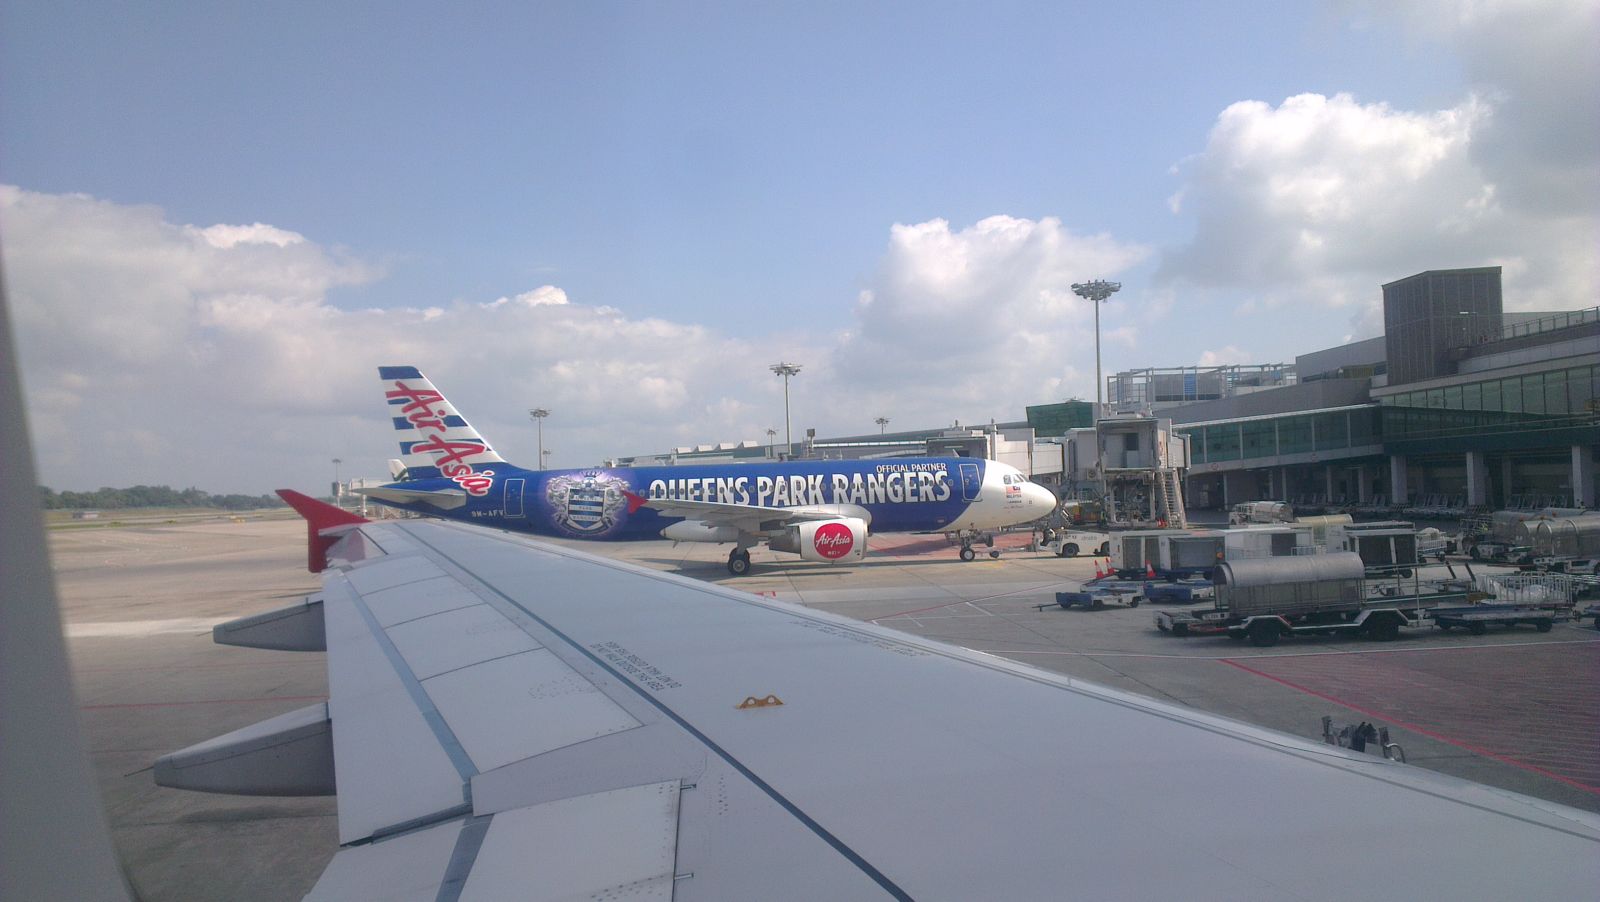 Air Asia Queens Park Rangers livery in Singapore